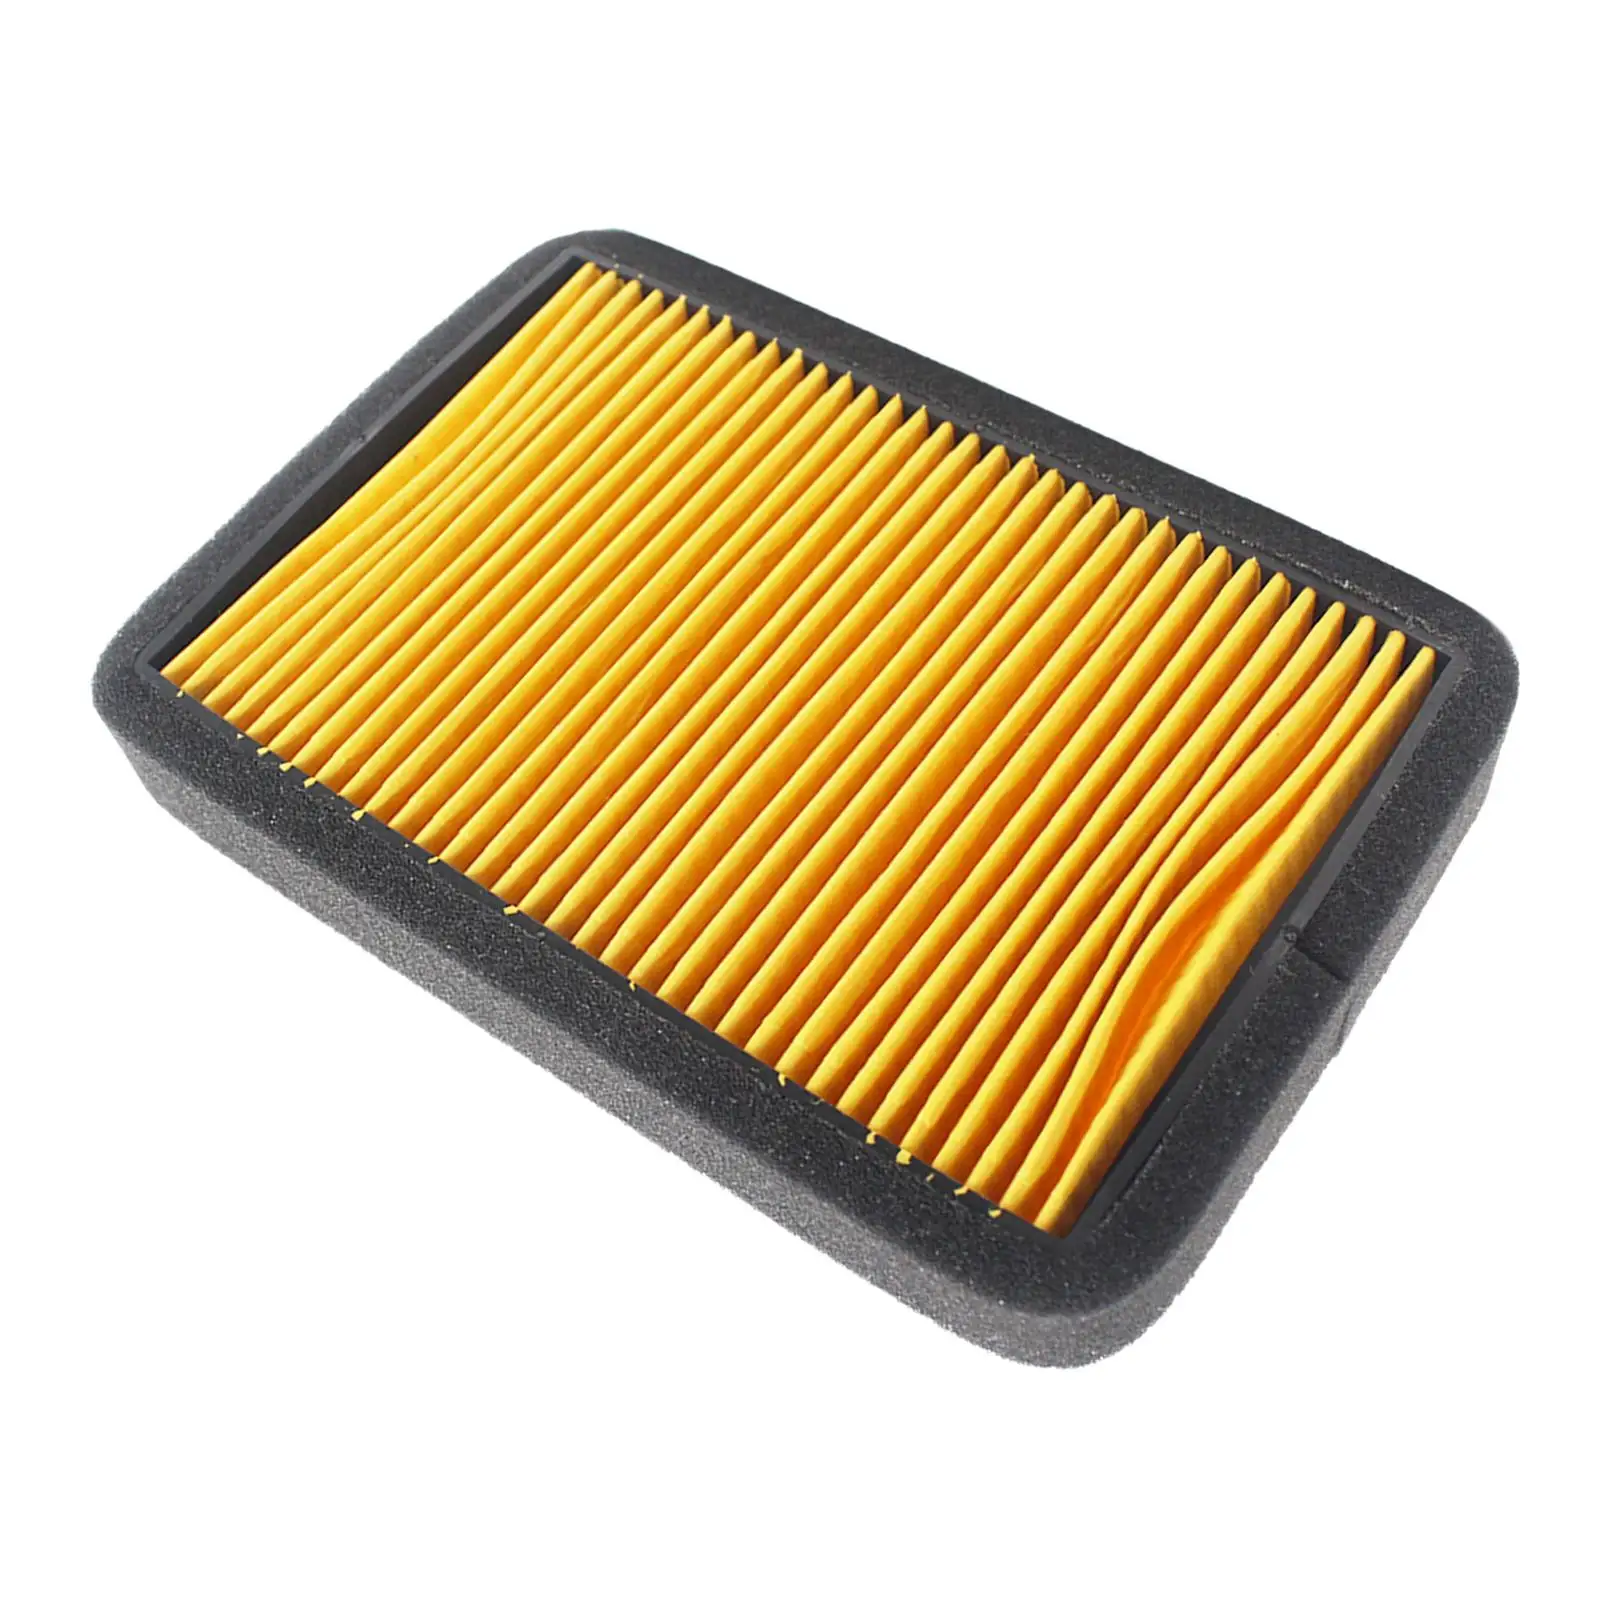 Air Filter Cleaner Bj150-29A-29B Replacement Fit for Benelli 150cc 500cc for Leoncino 500 502C Easy to Install Accessories